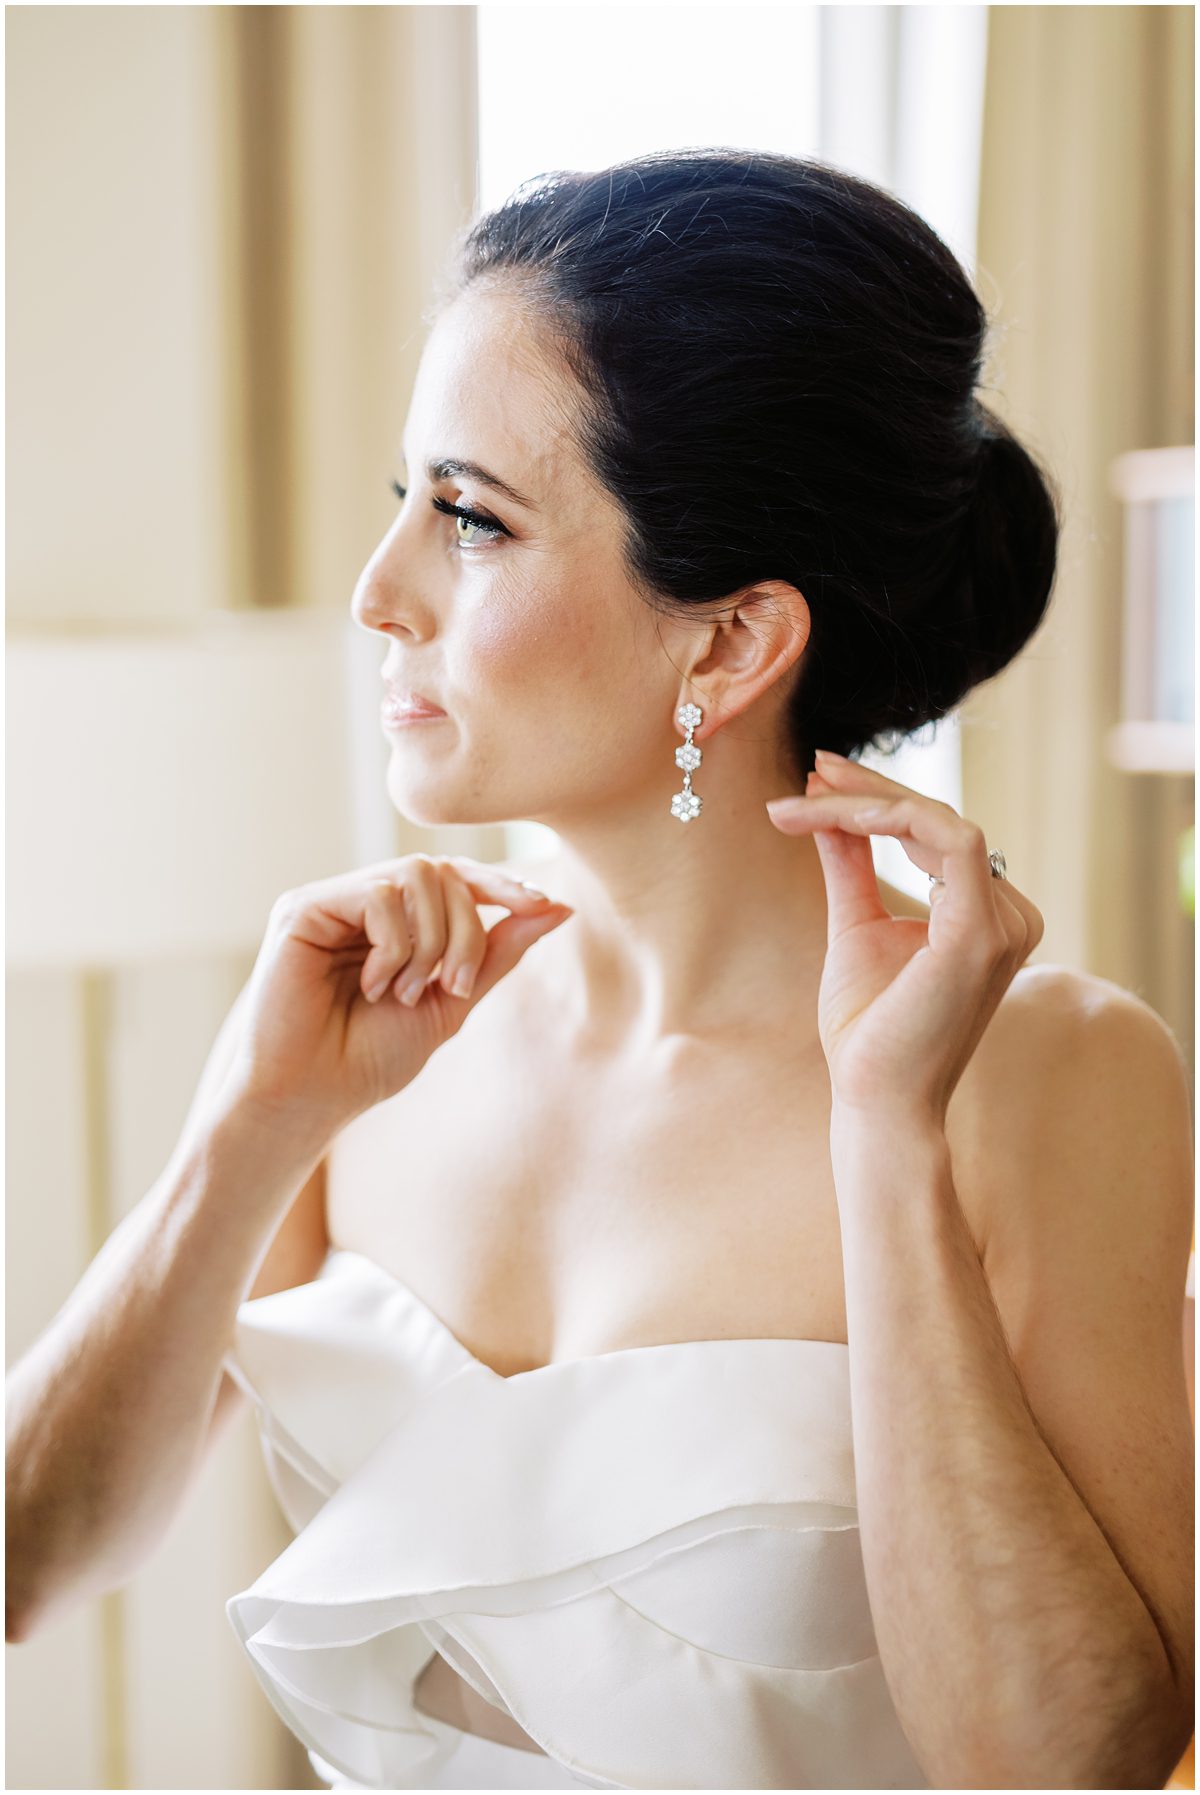 modern bridal look with low bun, ruffle gown and tear drop floral earrings